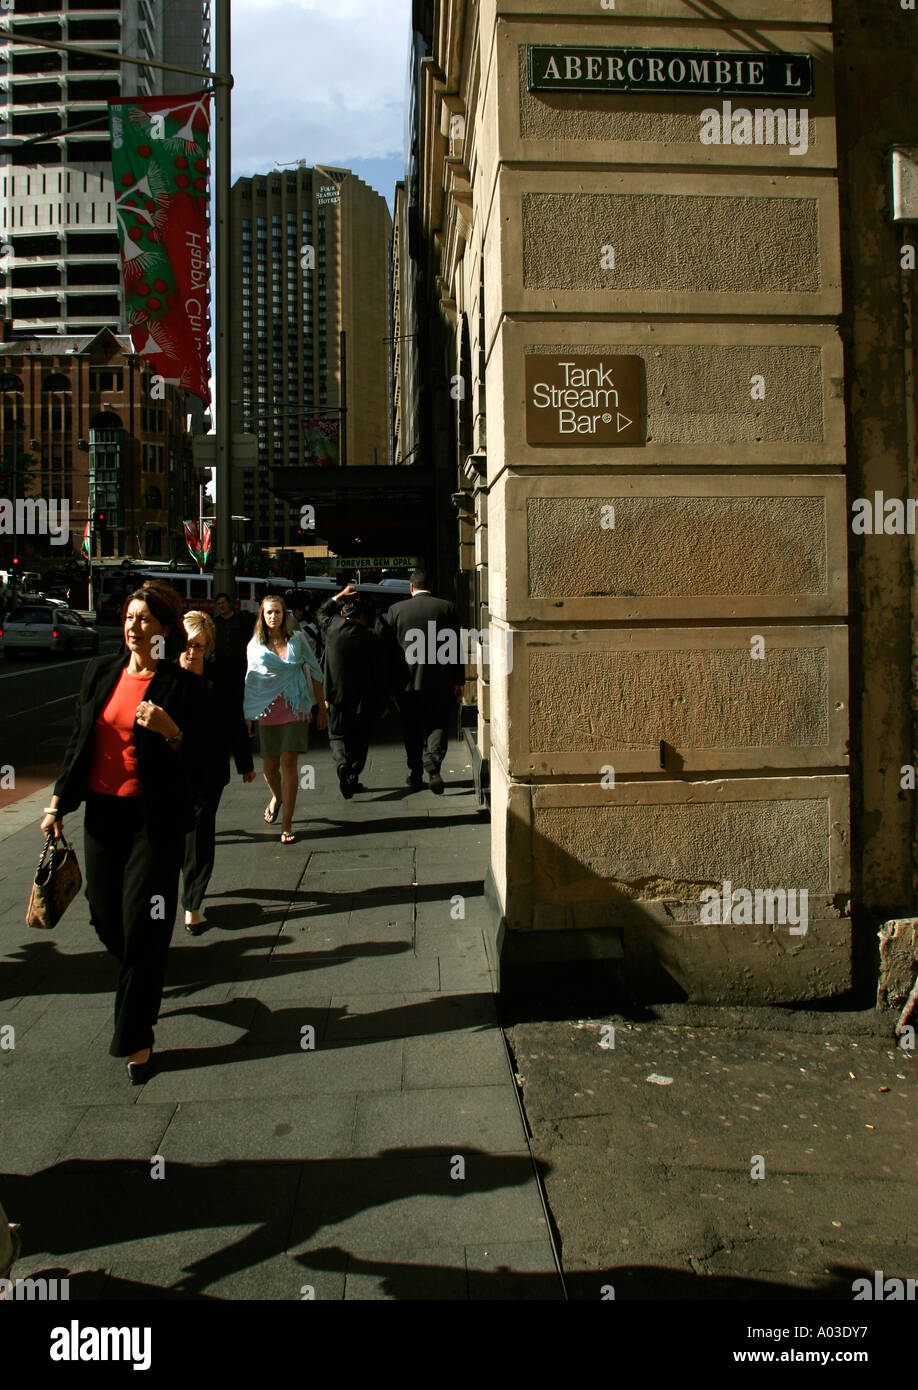 Pedestrians in George street Sydney pass by Abercrombie lane and the historic Tank Stream Bar Stock Photo